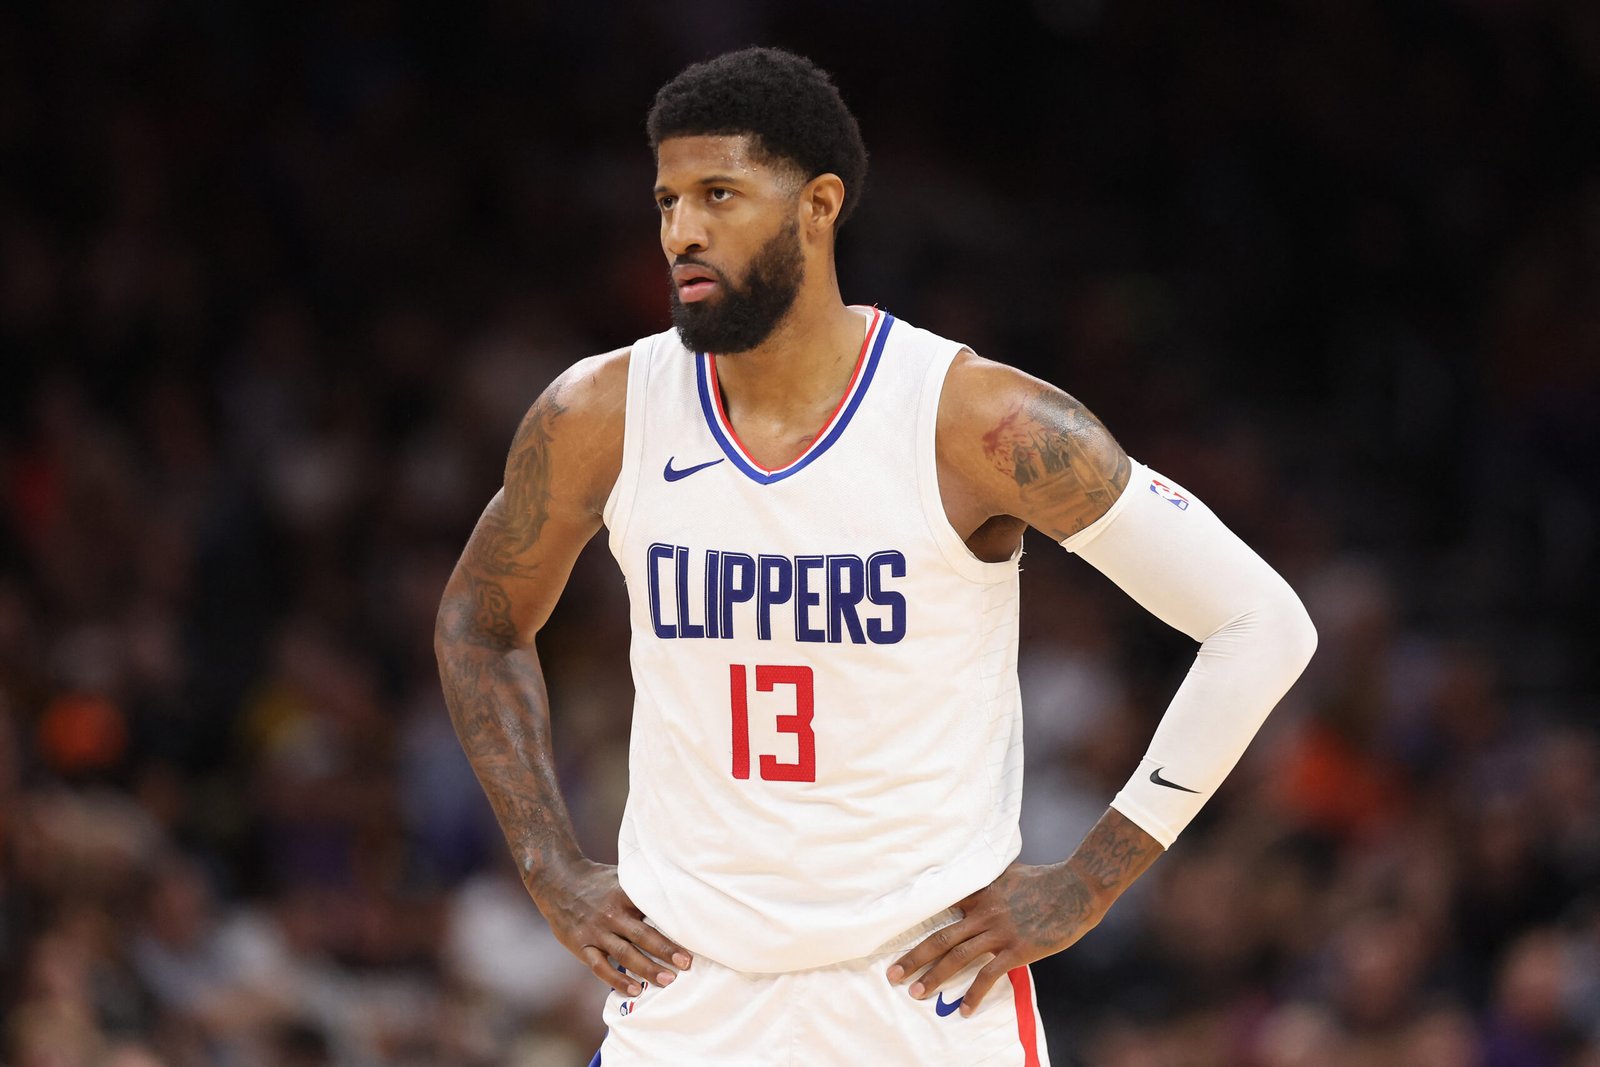 NBA: Paul George set to join 76ers on $212 million deal